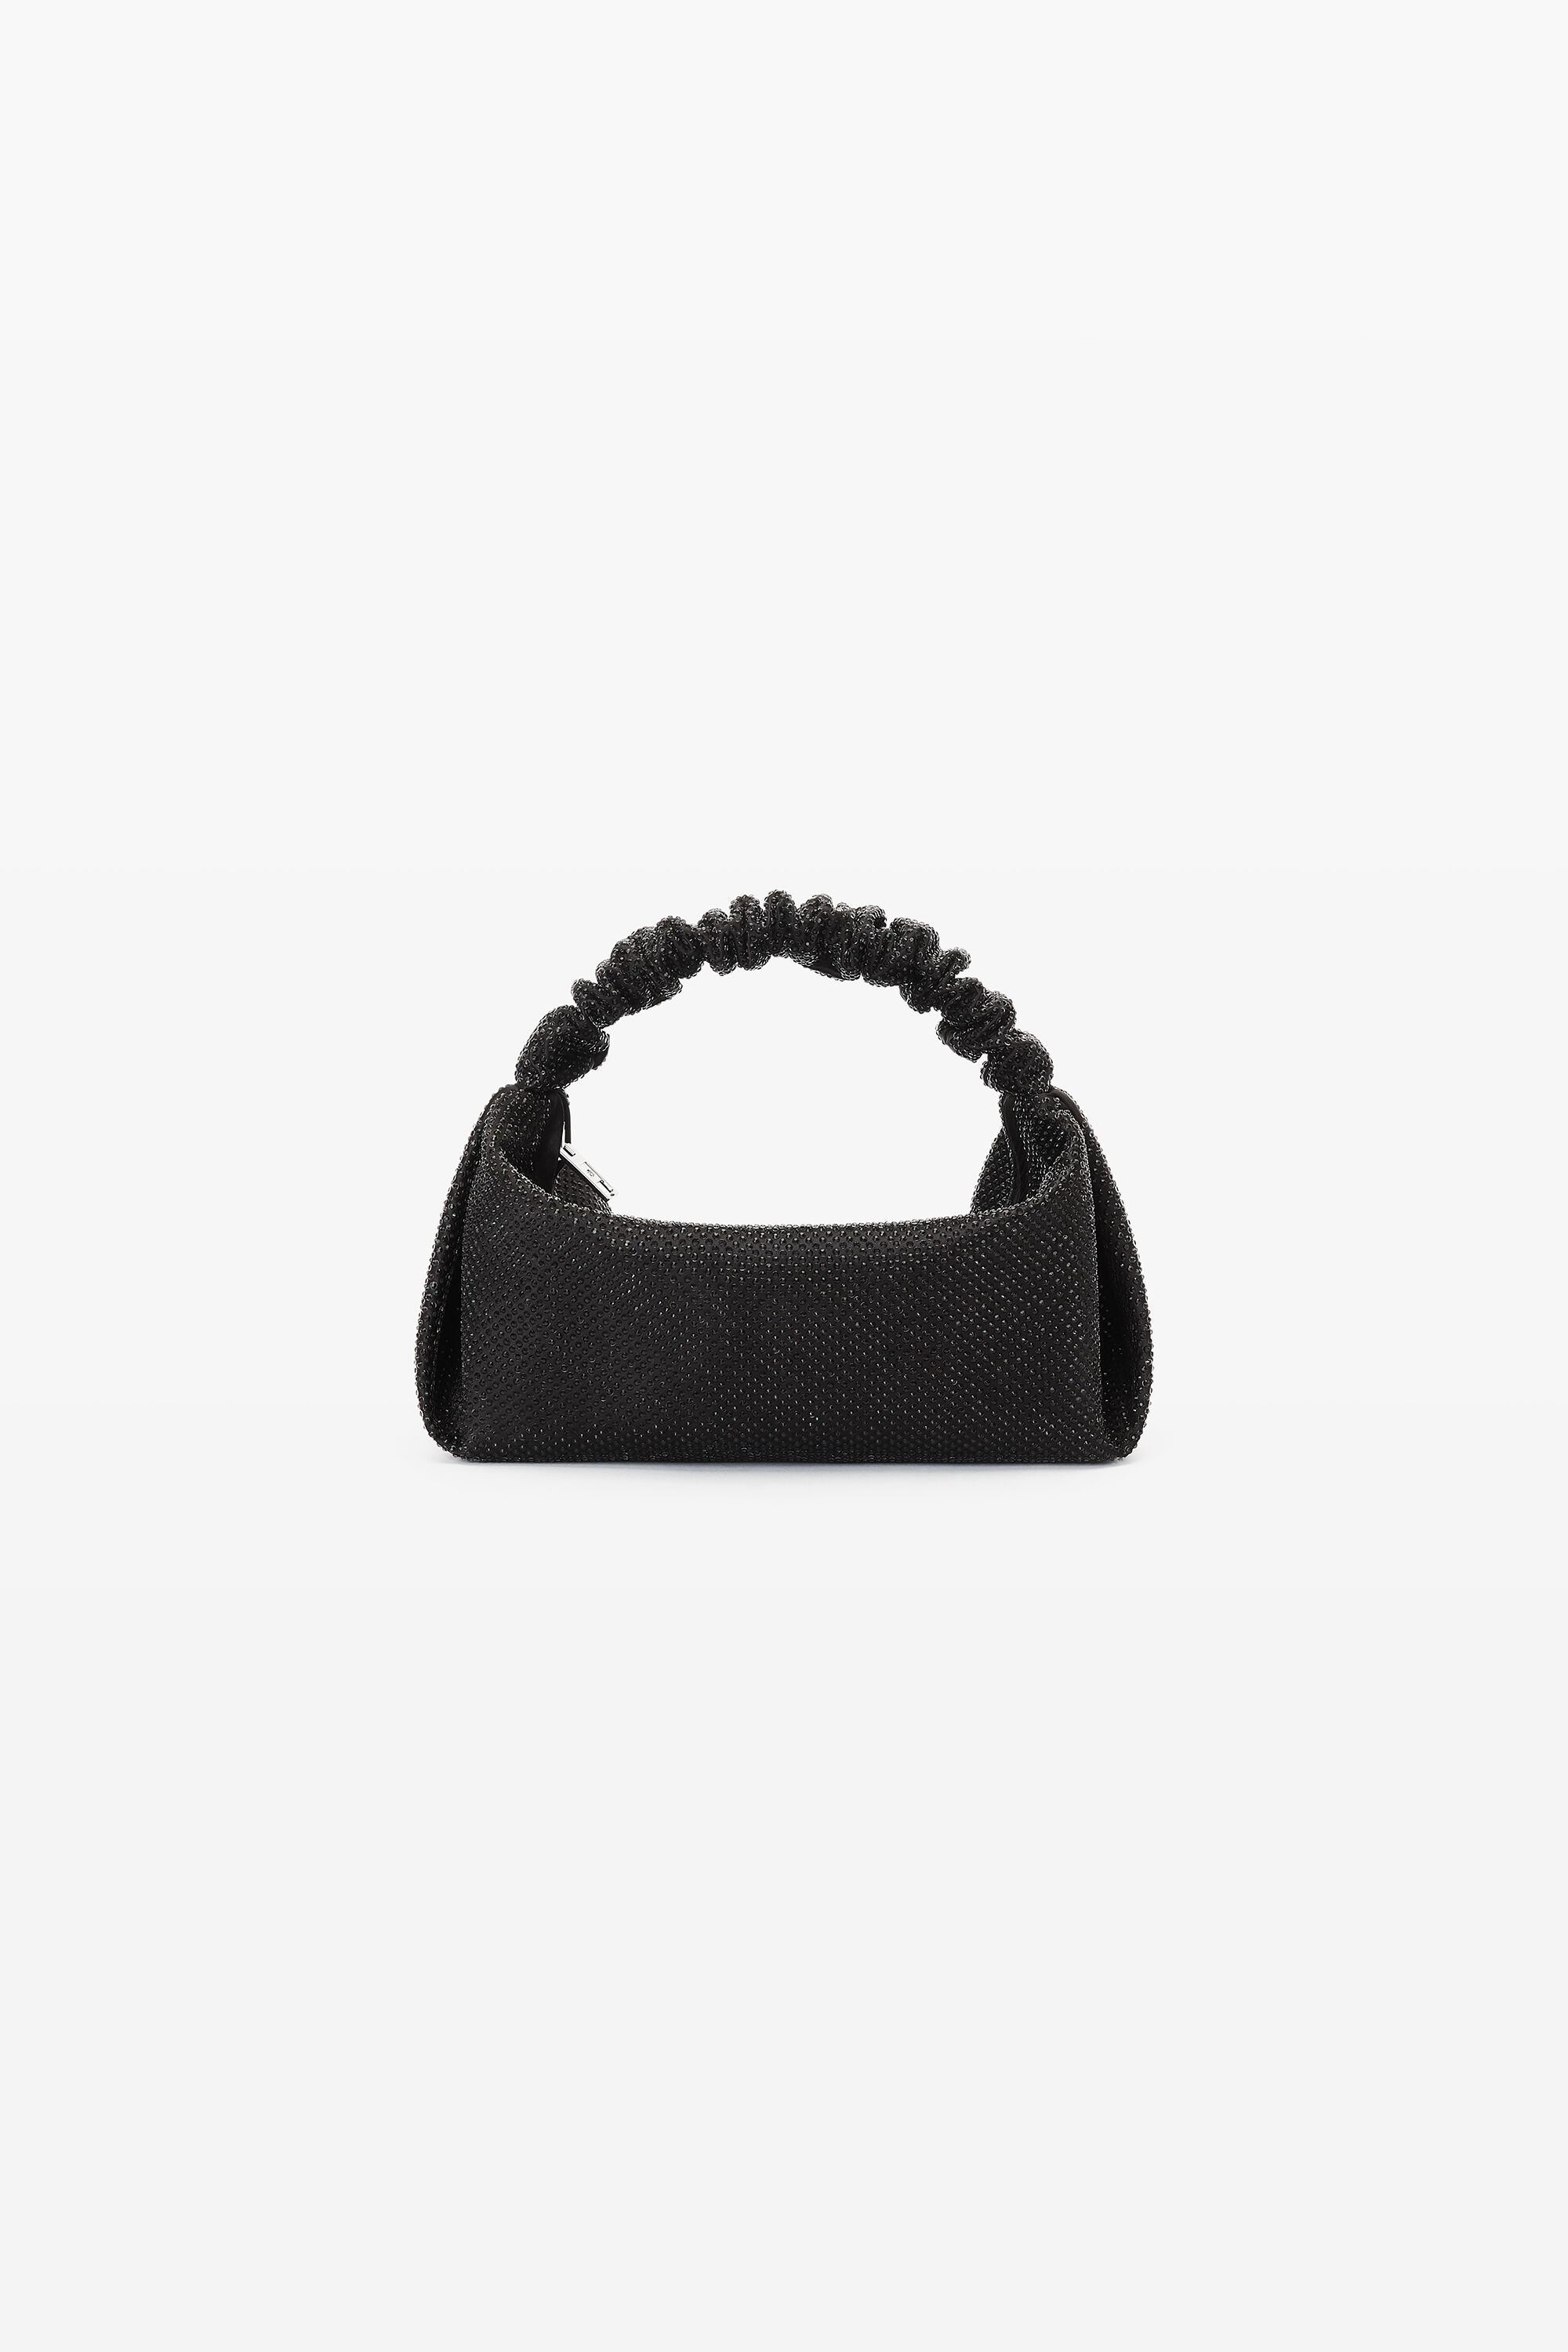 SCRUNCHIE MINI BAG IN SATIN WITH CLEAR BEADS in BLACK 